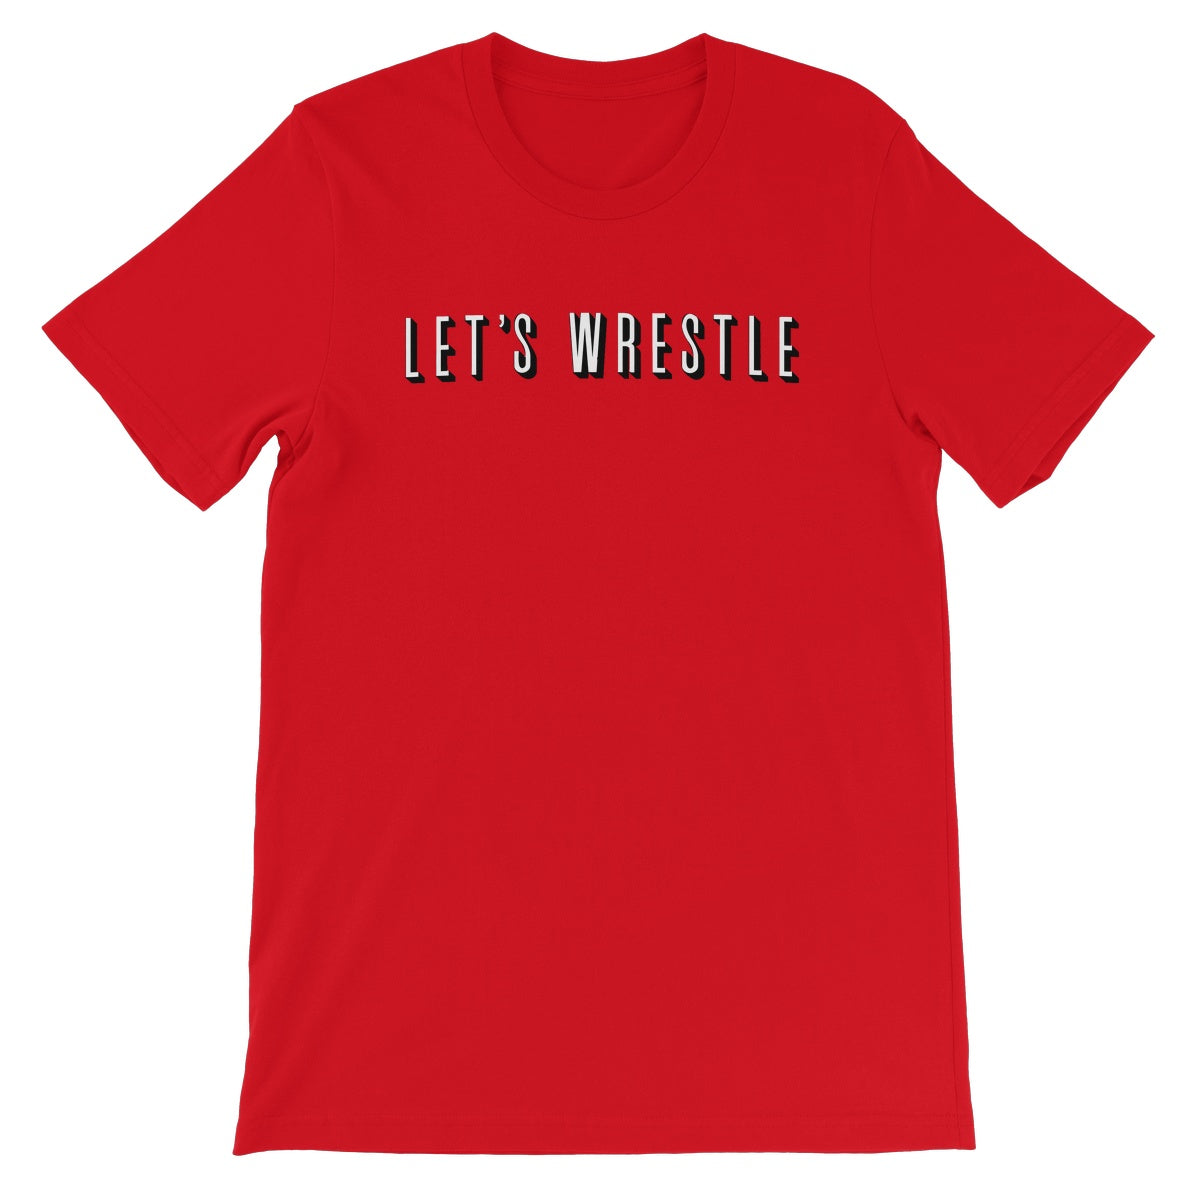 Let's Wrestle and Chill Unisex Short Sleeve T-Shirt